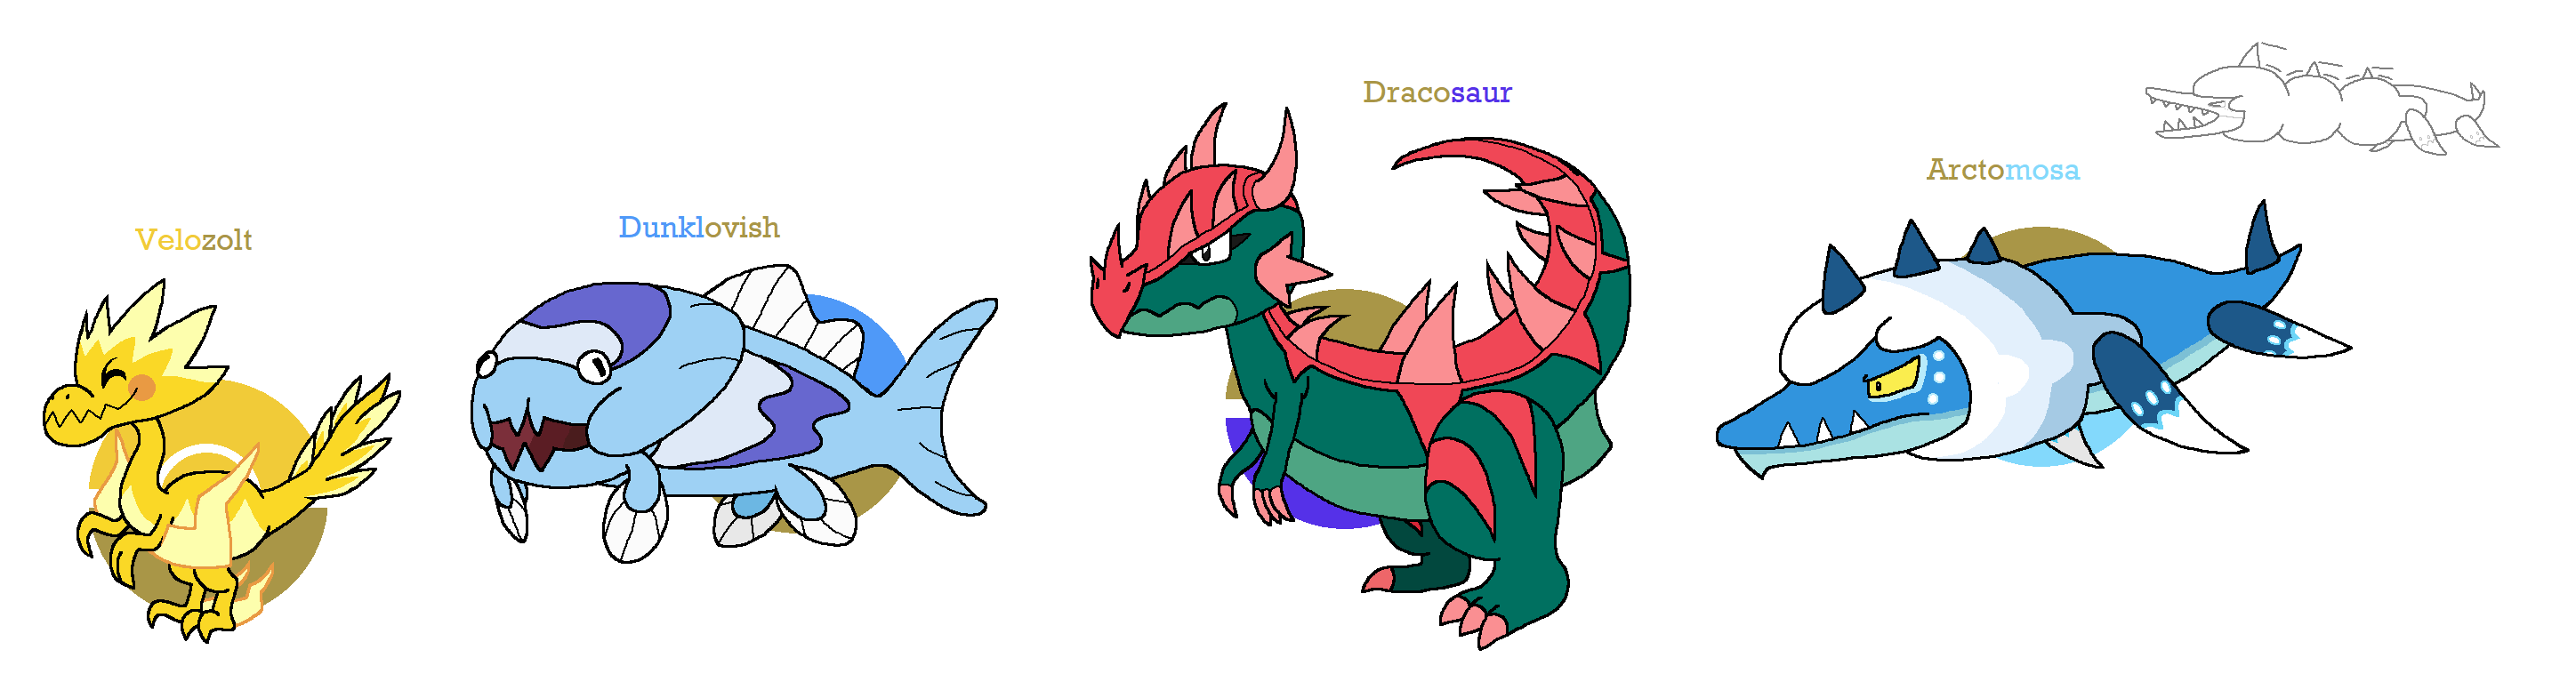 Pokemon Sword and Shield - Unfused Fossils by Fistipuffs on DeviantArt